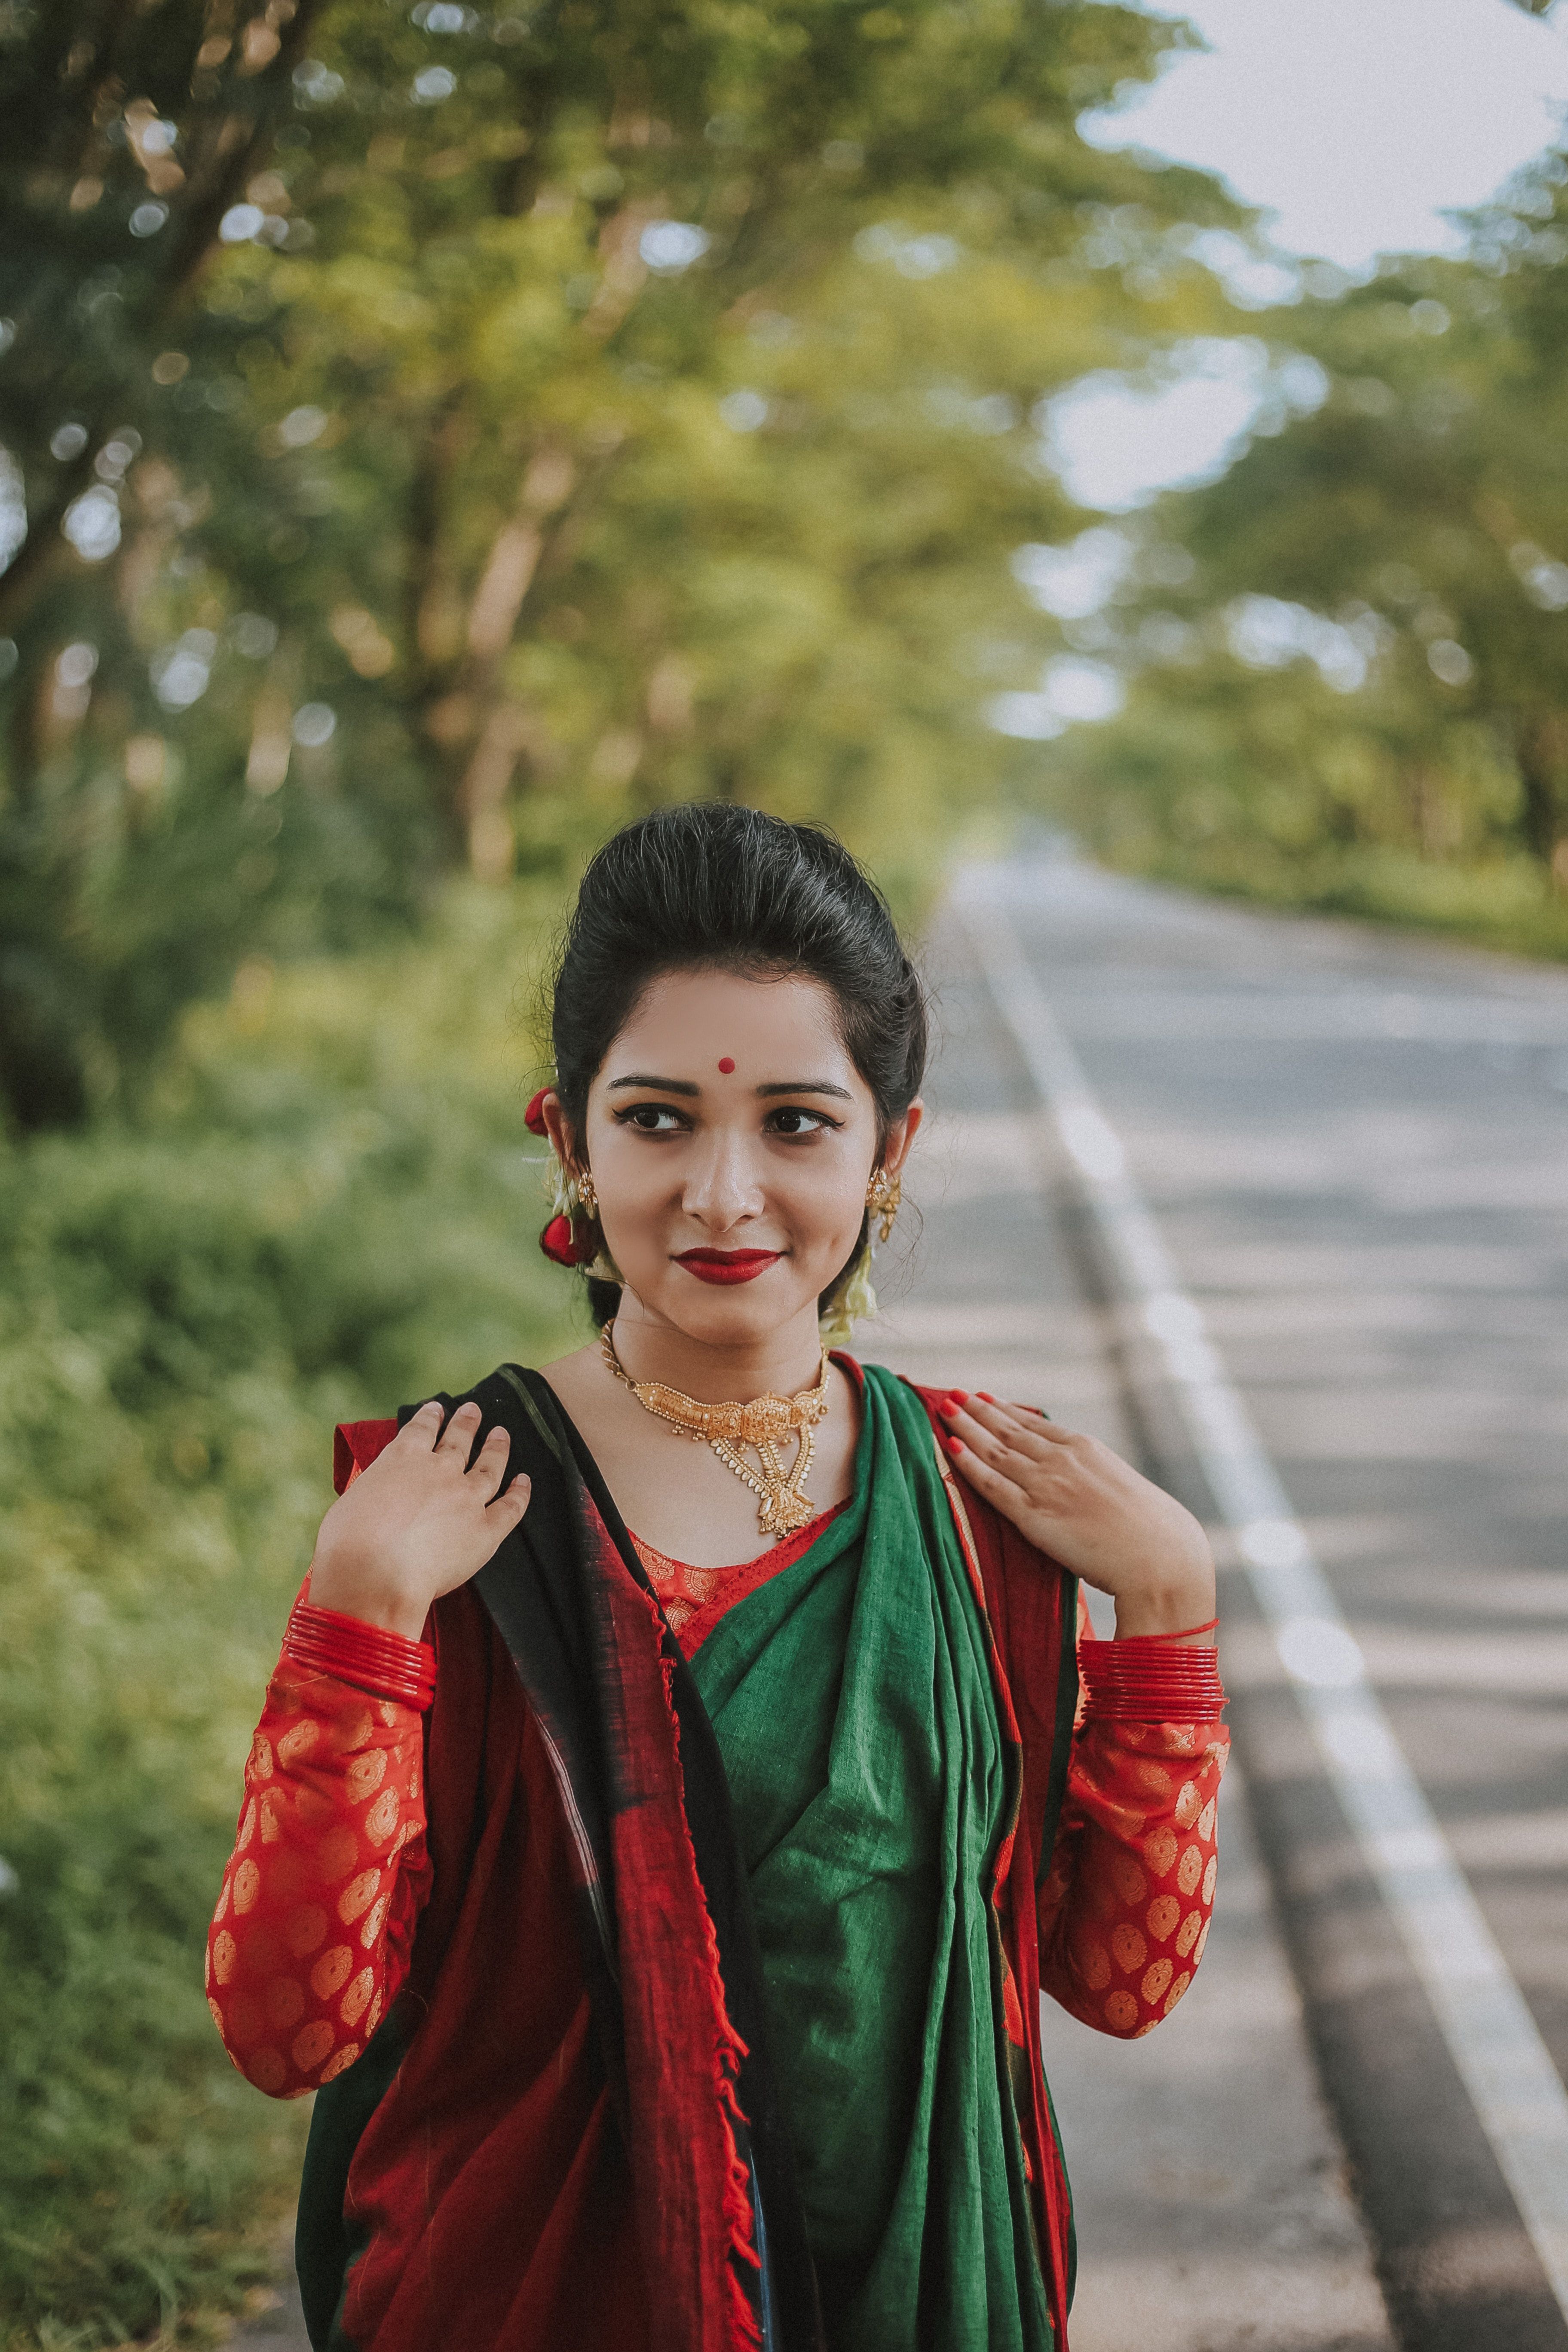 Woman in Green and Red Traditional Indian Dress · Free